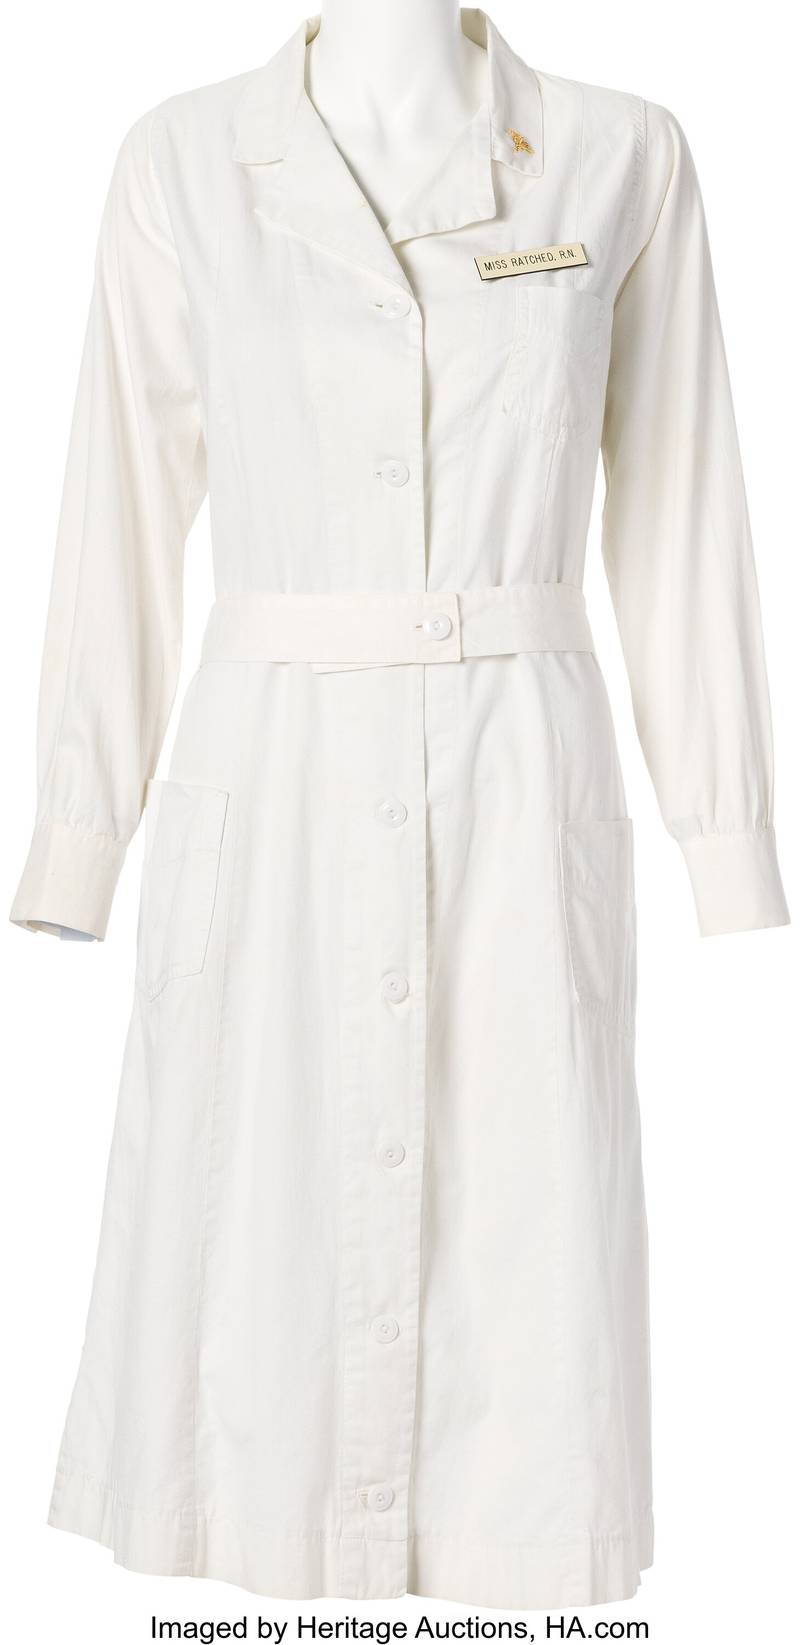 "One Flew Over the Cuckoo's Nest" Louise Fletcher "Nurse Mildred Ratched" screen-worn uniform